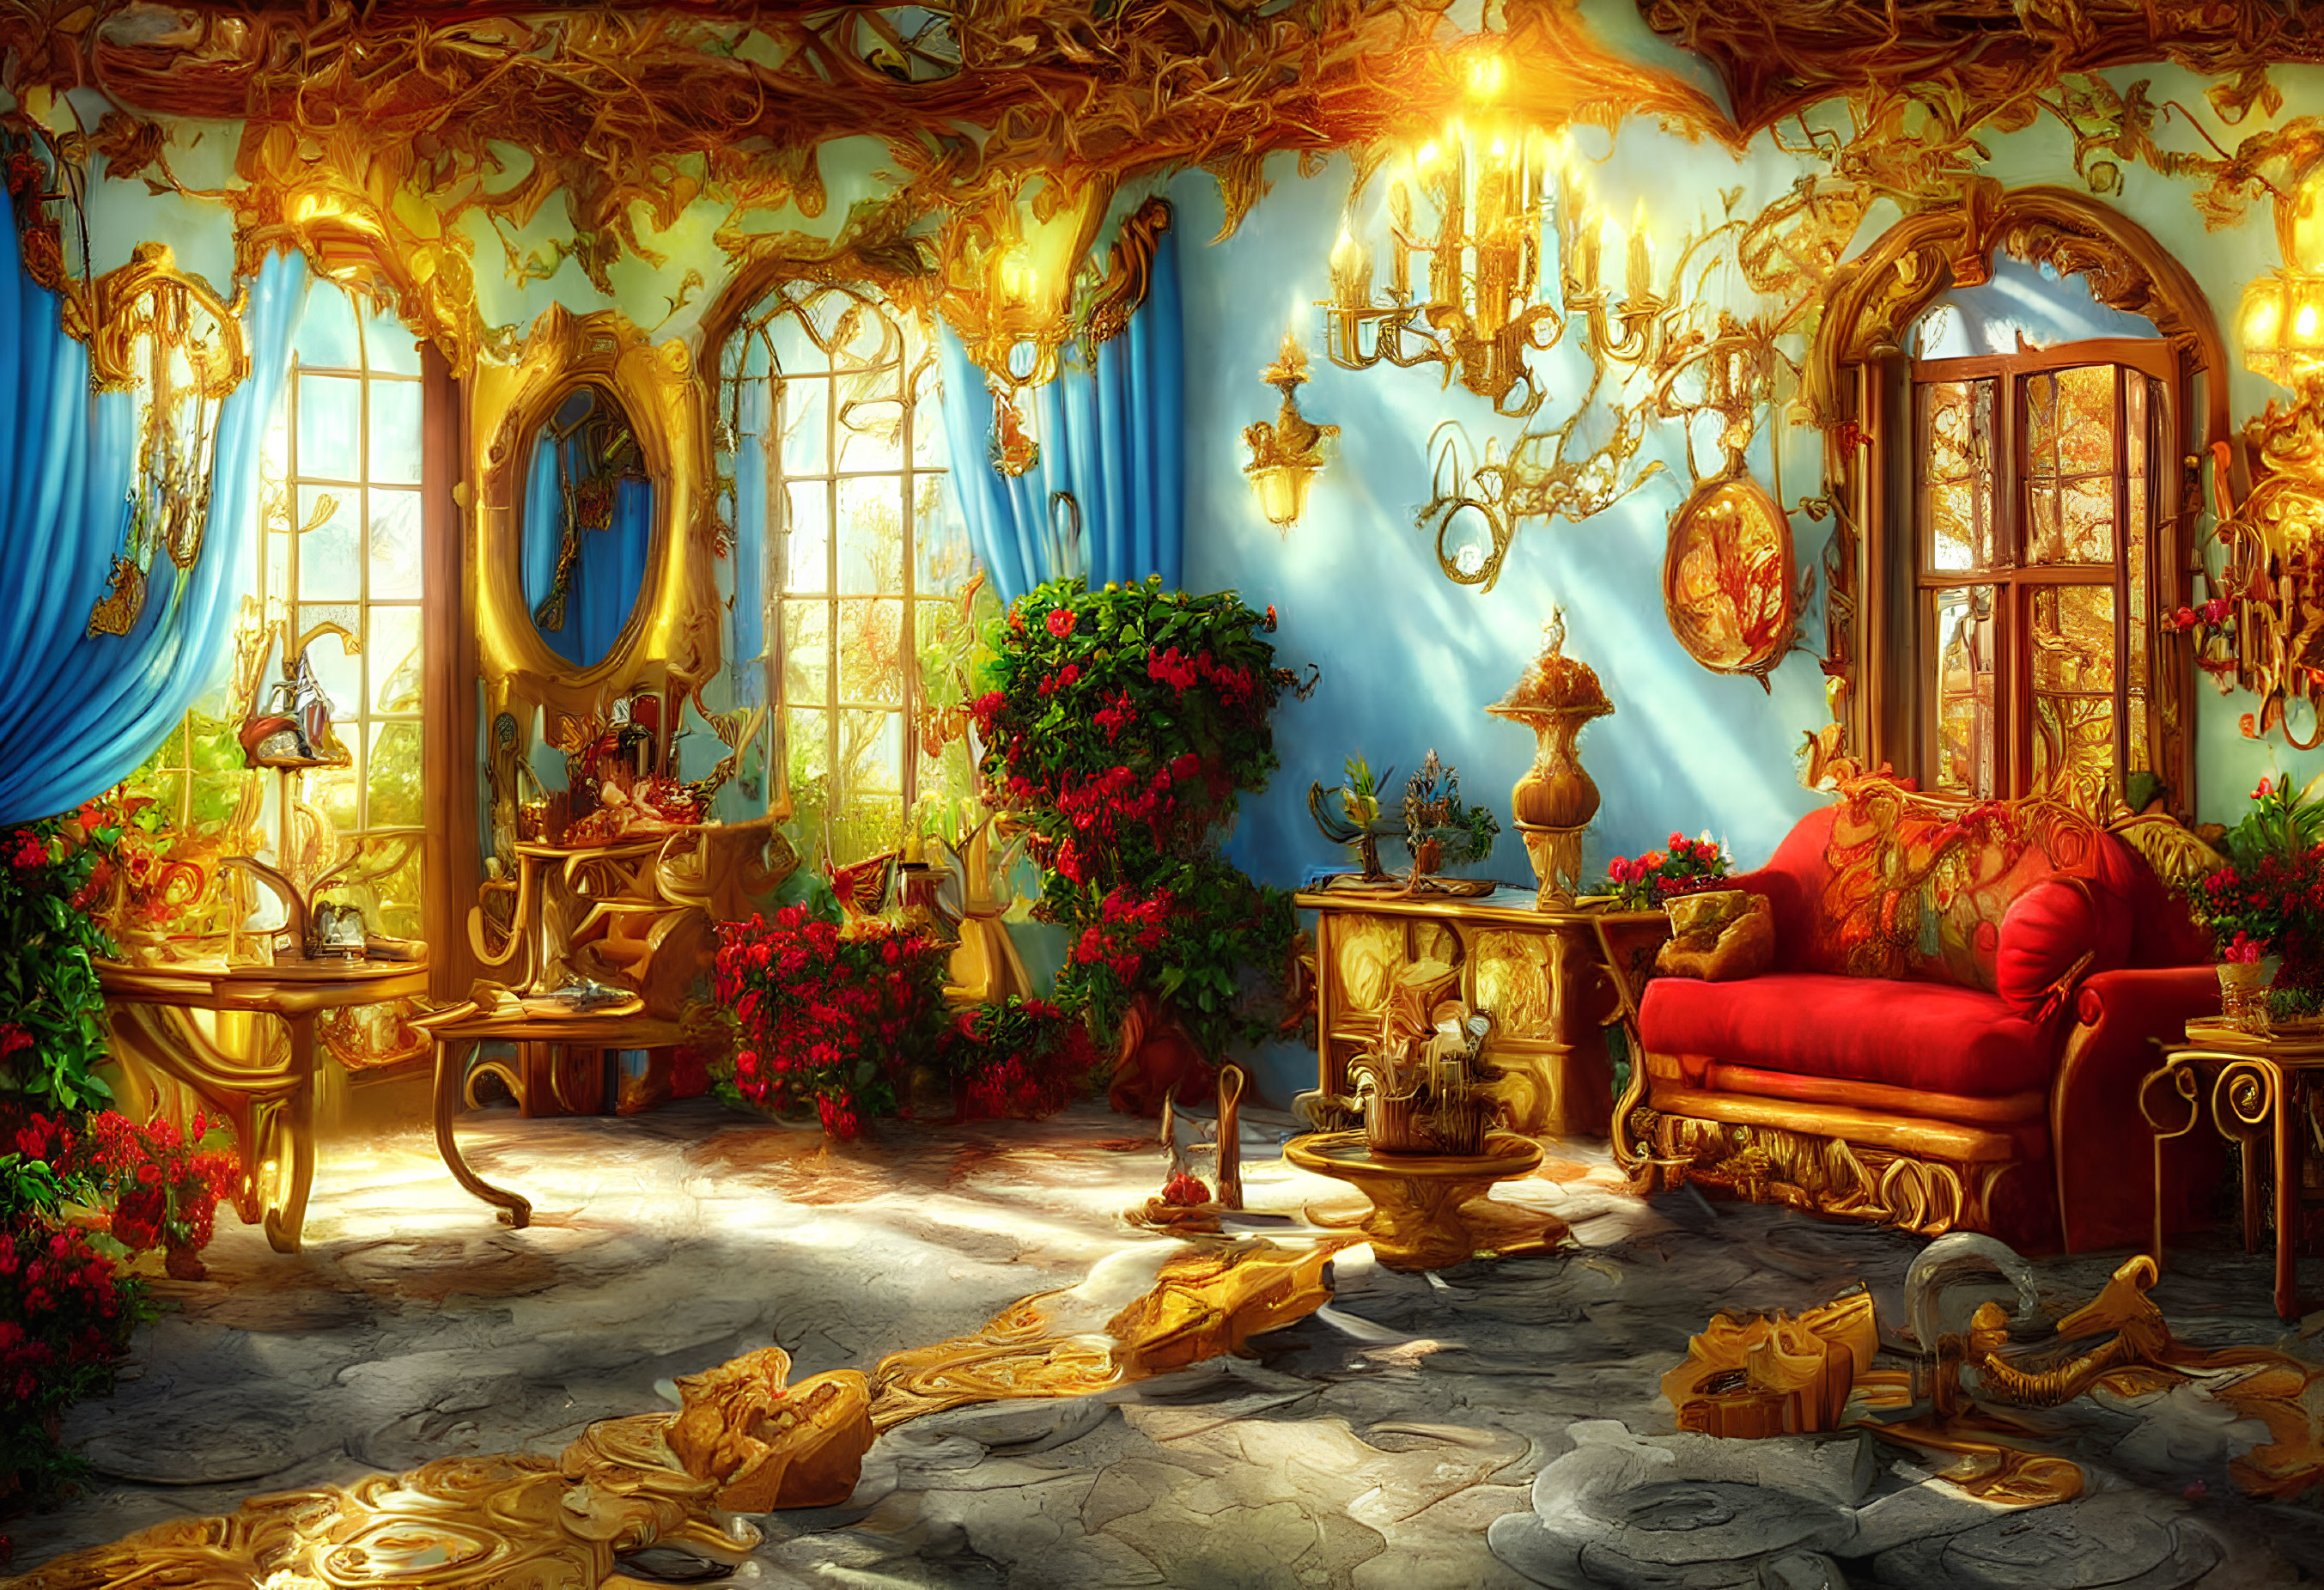 Luxurious Fantasy Room with Golden Accents and Red Couch